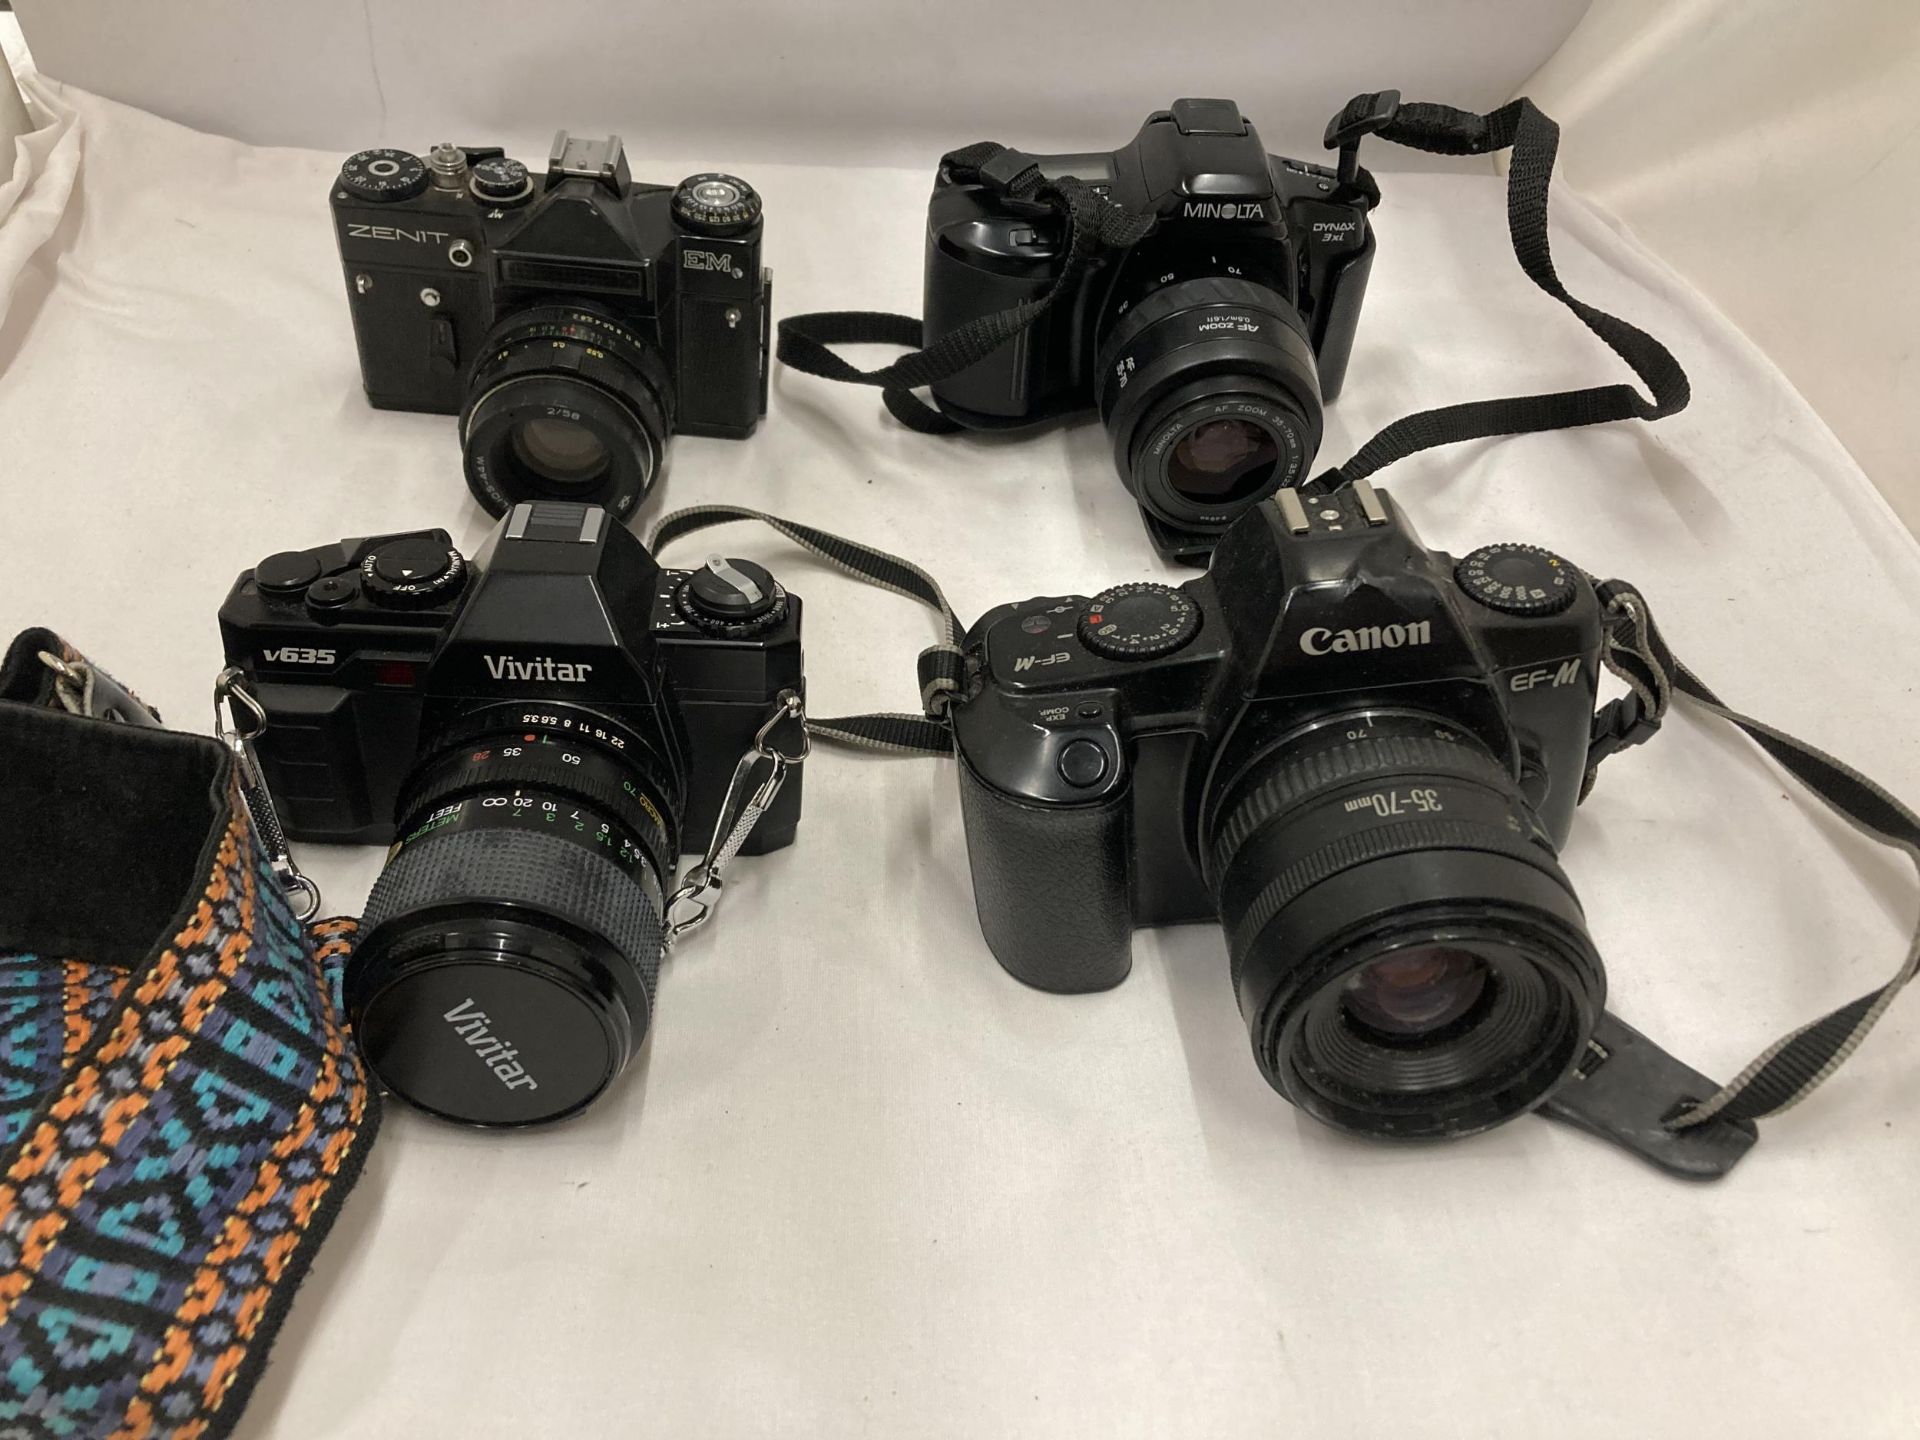 A COLLECTION OF VINTAGE CAMERAS TO INCLUDE CANON EF-M, VIVITAR, ZENIT AND MINOLTA, WITH ASSORTED - Image 2 of 5